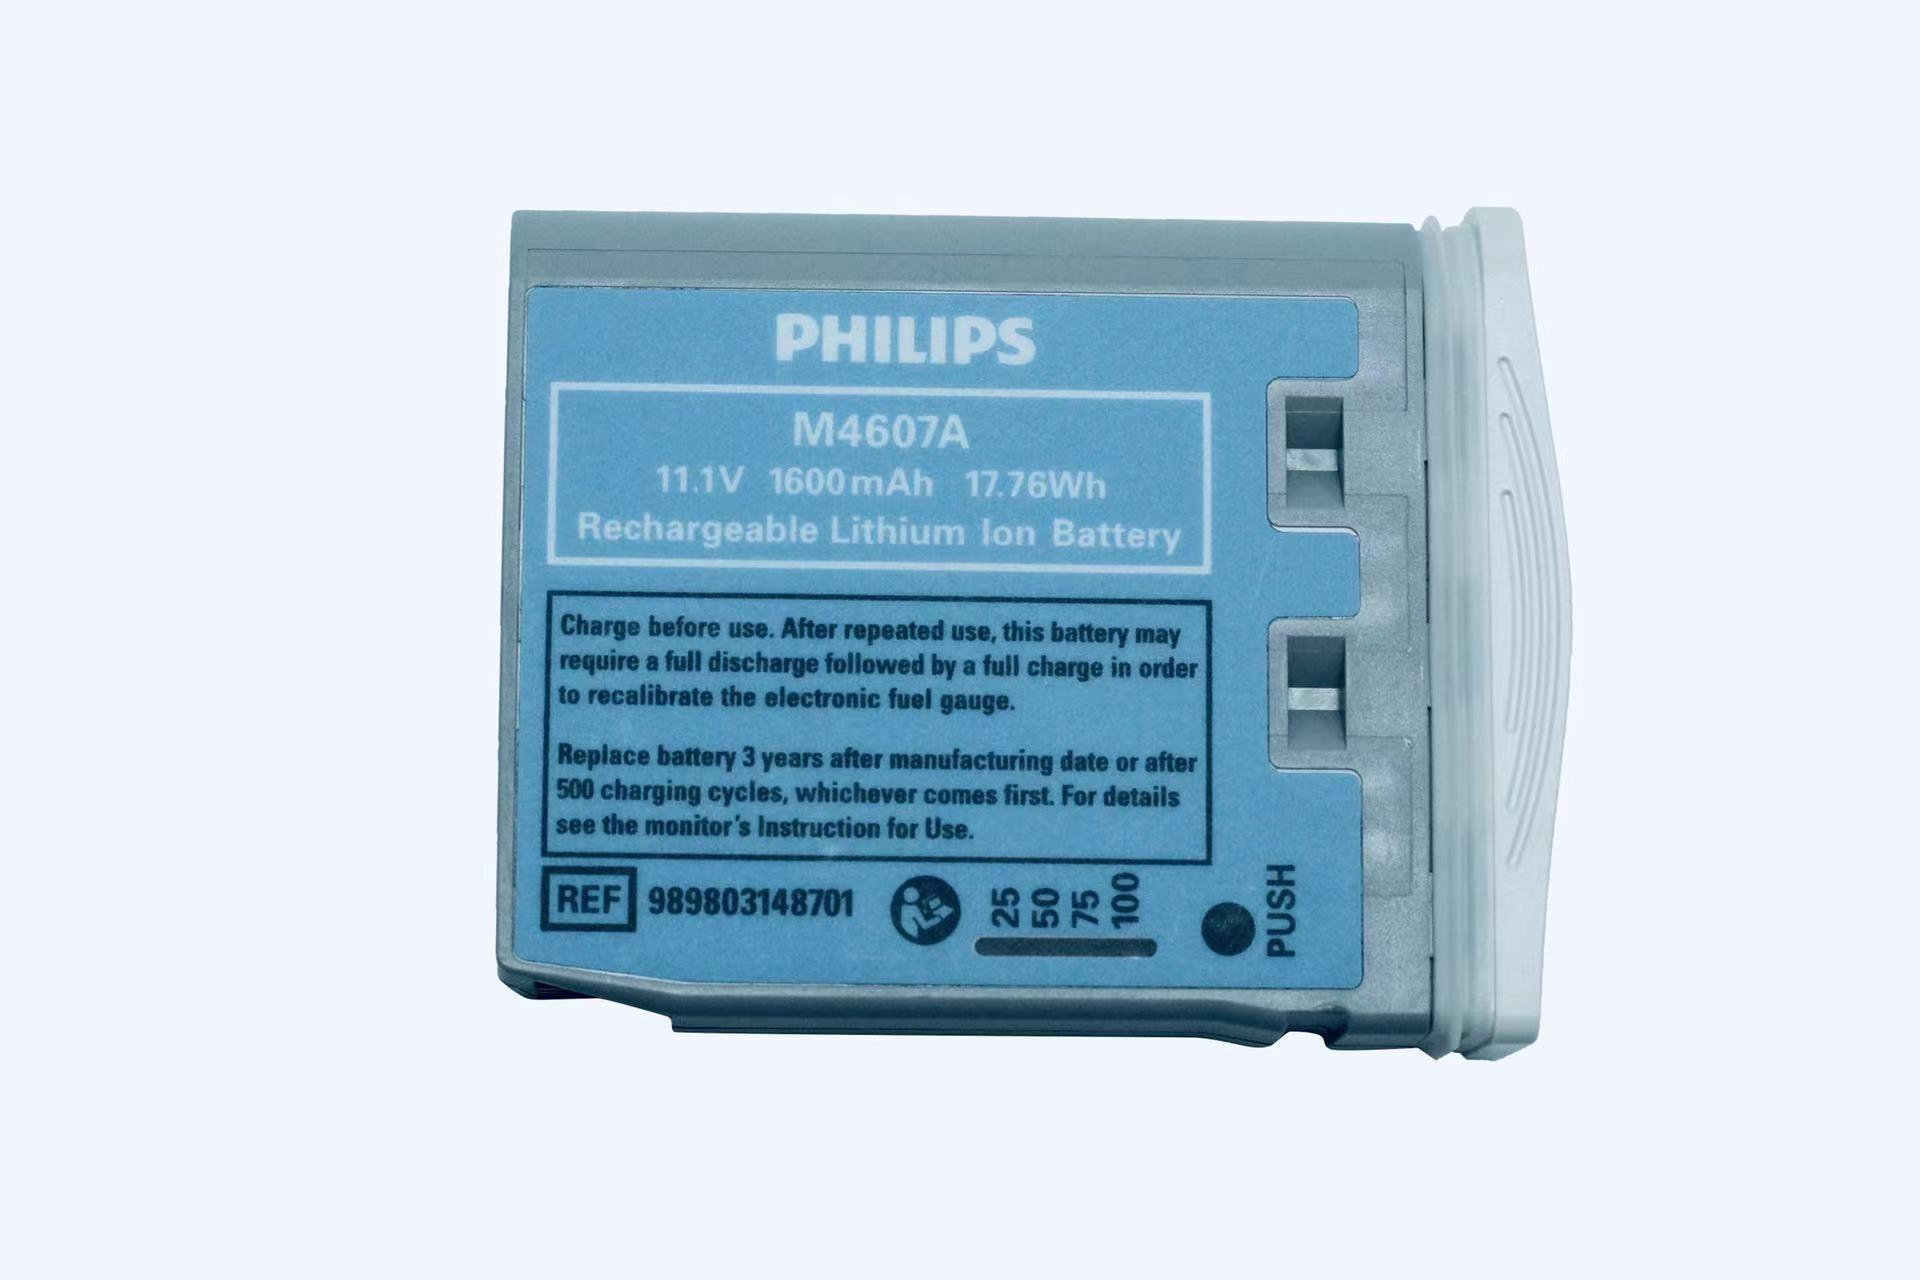 Original Philips M4607A for Philips IntelliVue MP2 X2 Transport Patient Monitor Battery 11.1V Li-ion Battery 989803148701 Medical Battery, Patient Monitor Battery, PHILIPS, Philips Battery, Rechargeable, Stock In Canada, Stock In Mexico, top selling, Transport Patient Monitor Battery M4607A PHILIPS